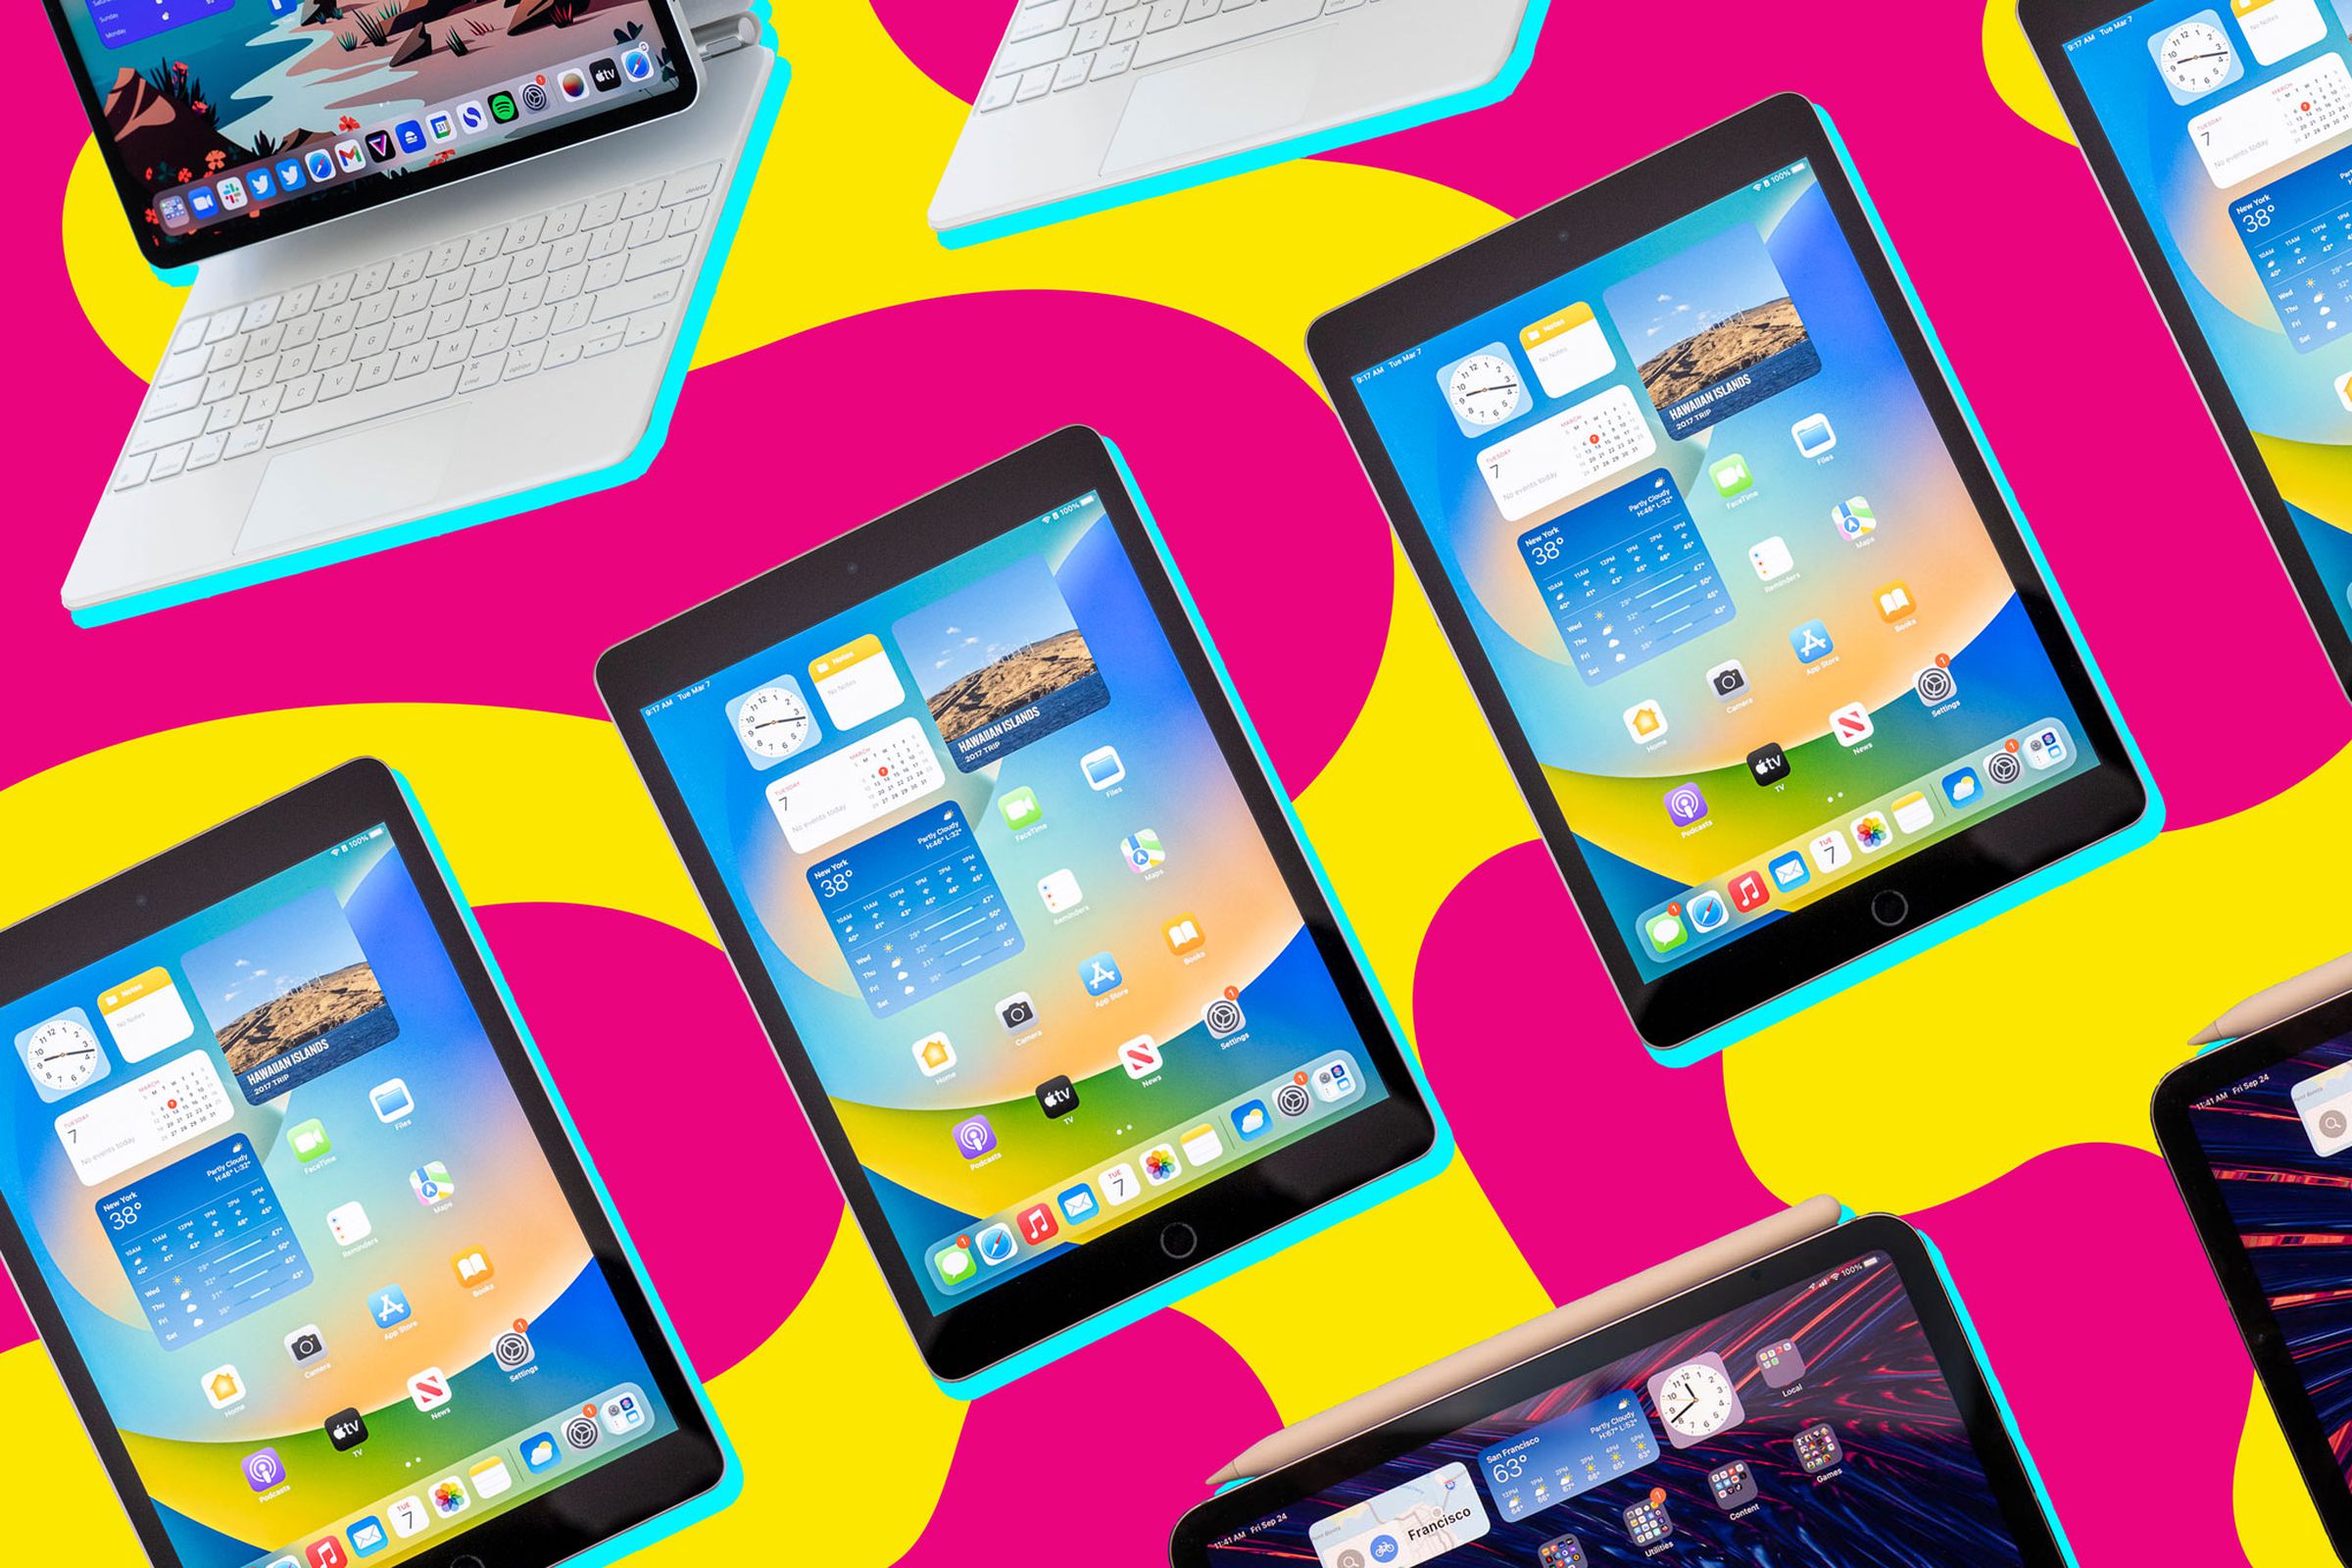 Various iPads in the air against a pink and yellow background.